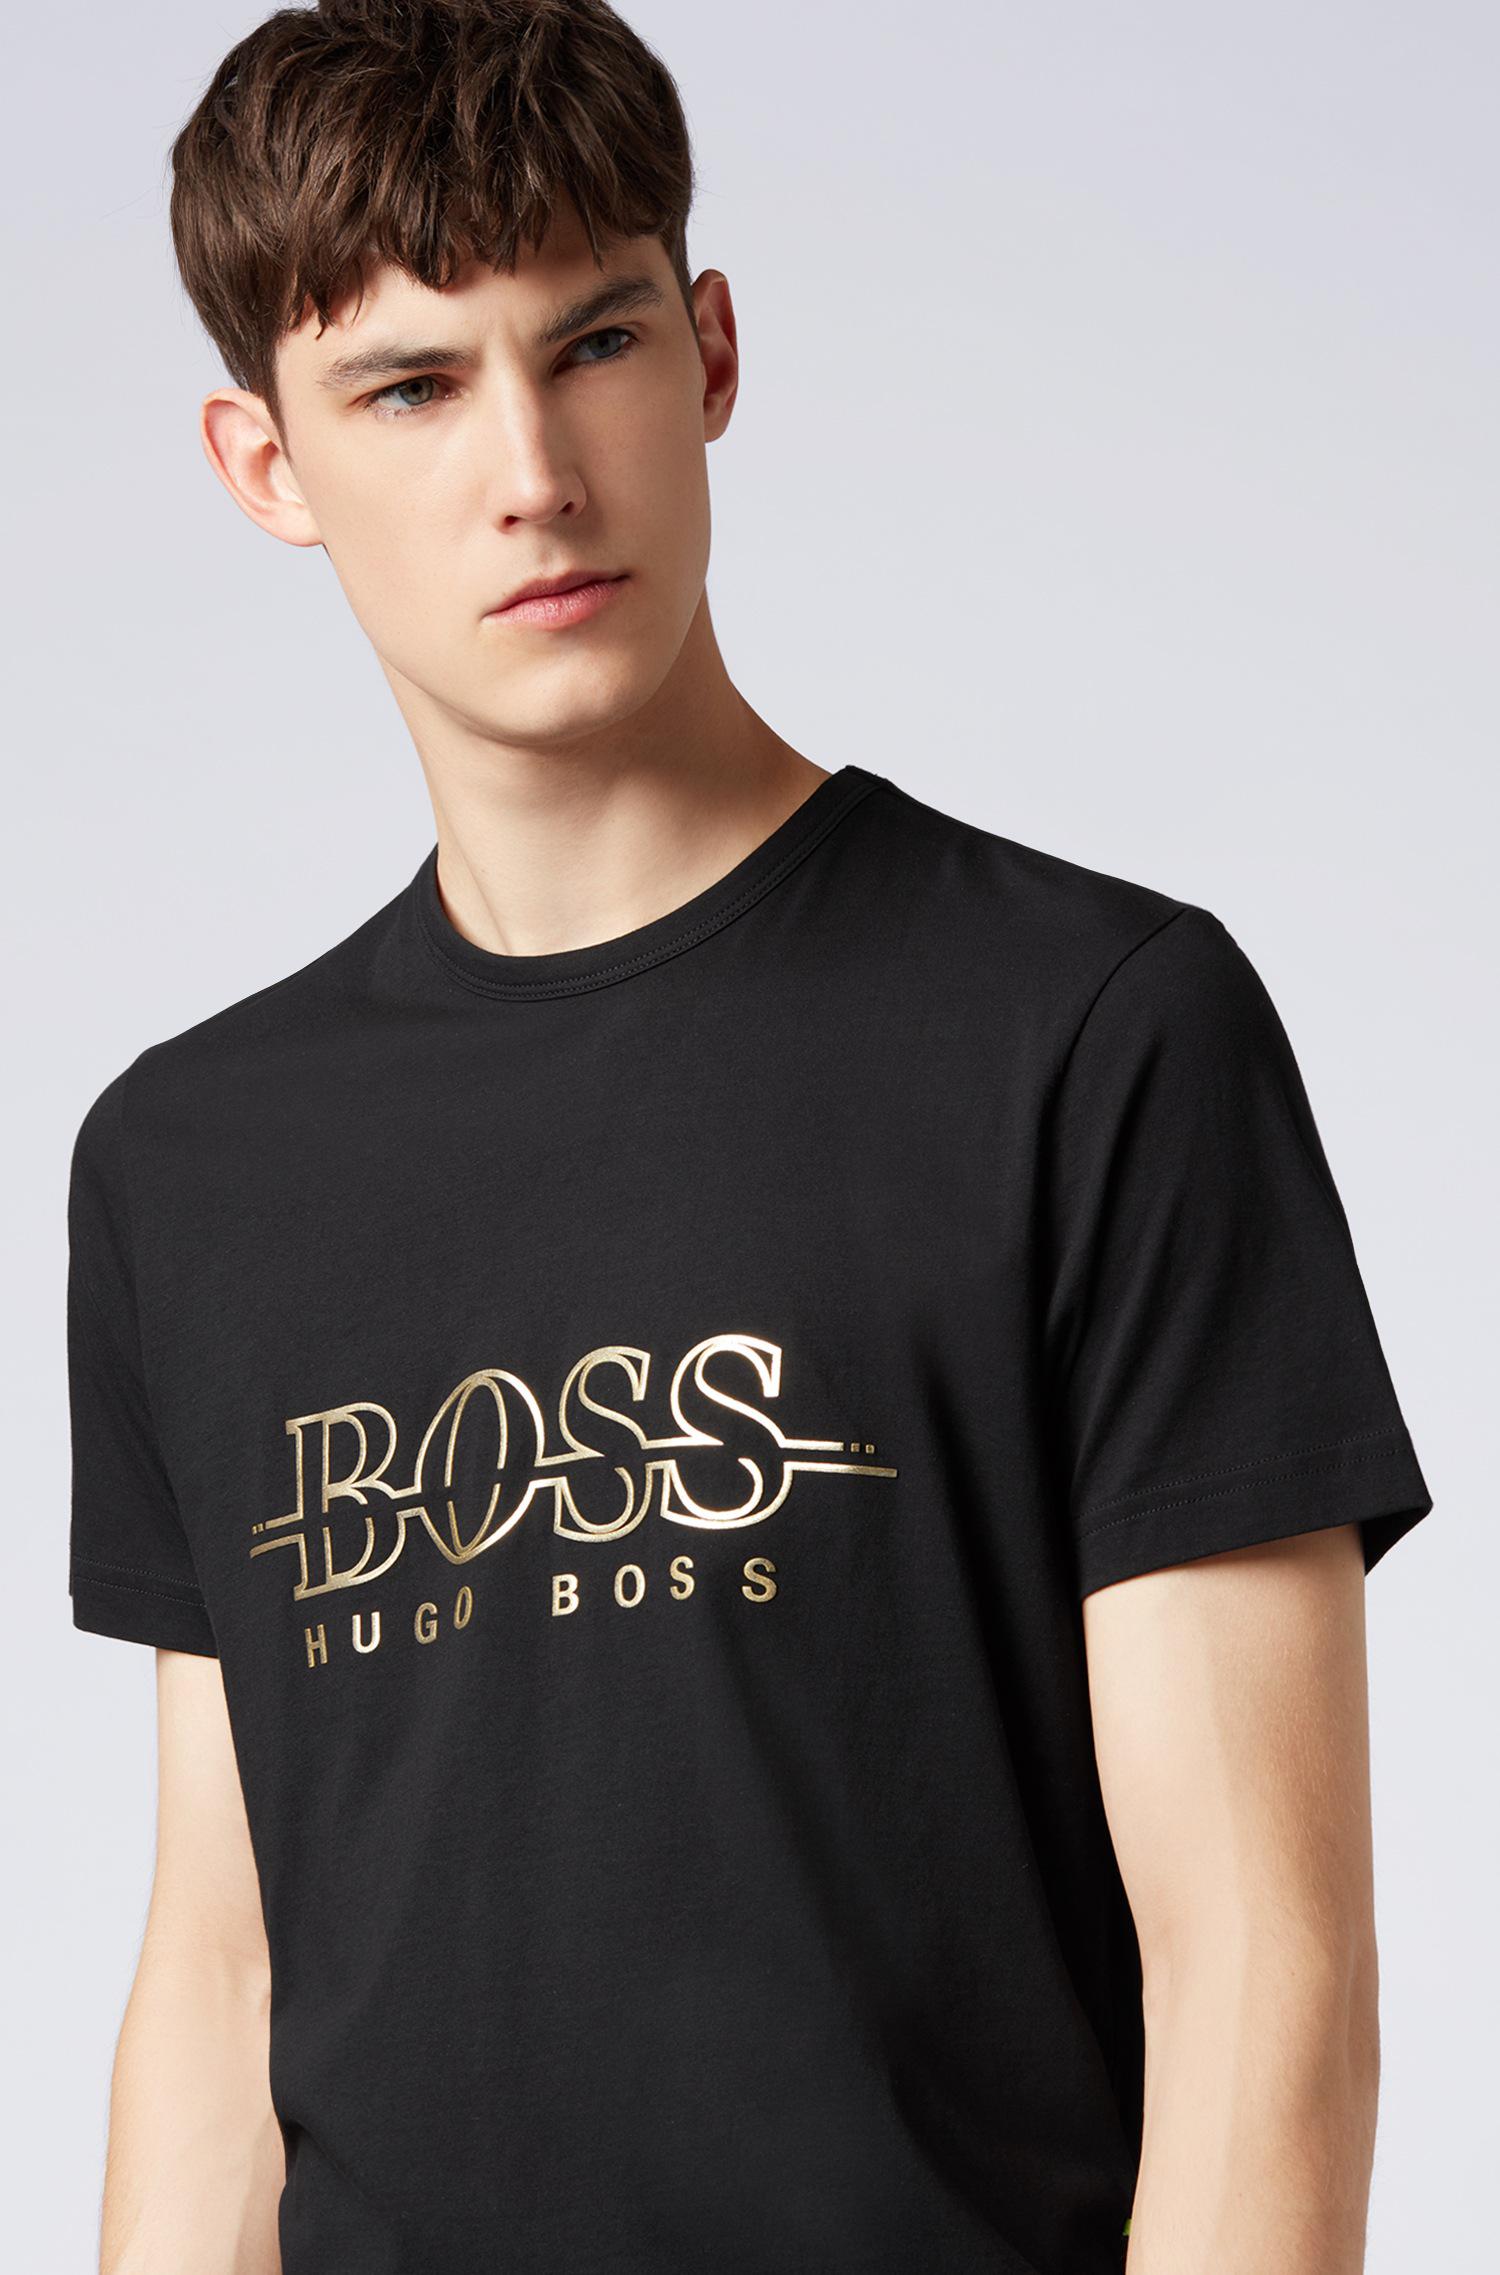 BOSS by Hugo Boss Gold Capsule T-shirt In Pure Cotton With Foil Artwork in  Black for Men - Lyst